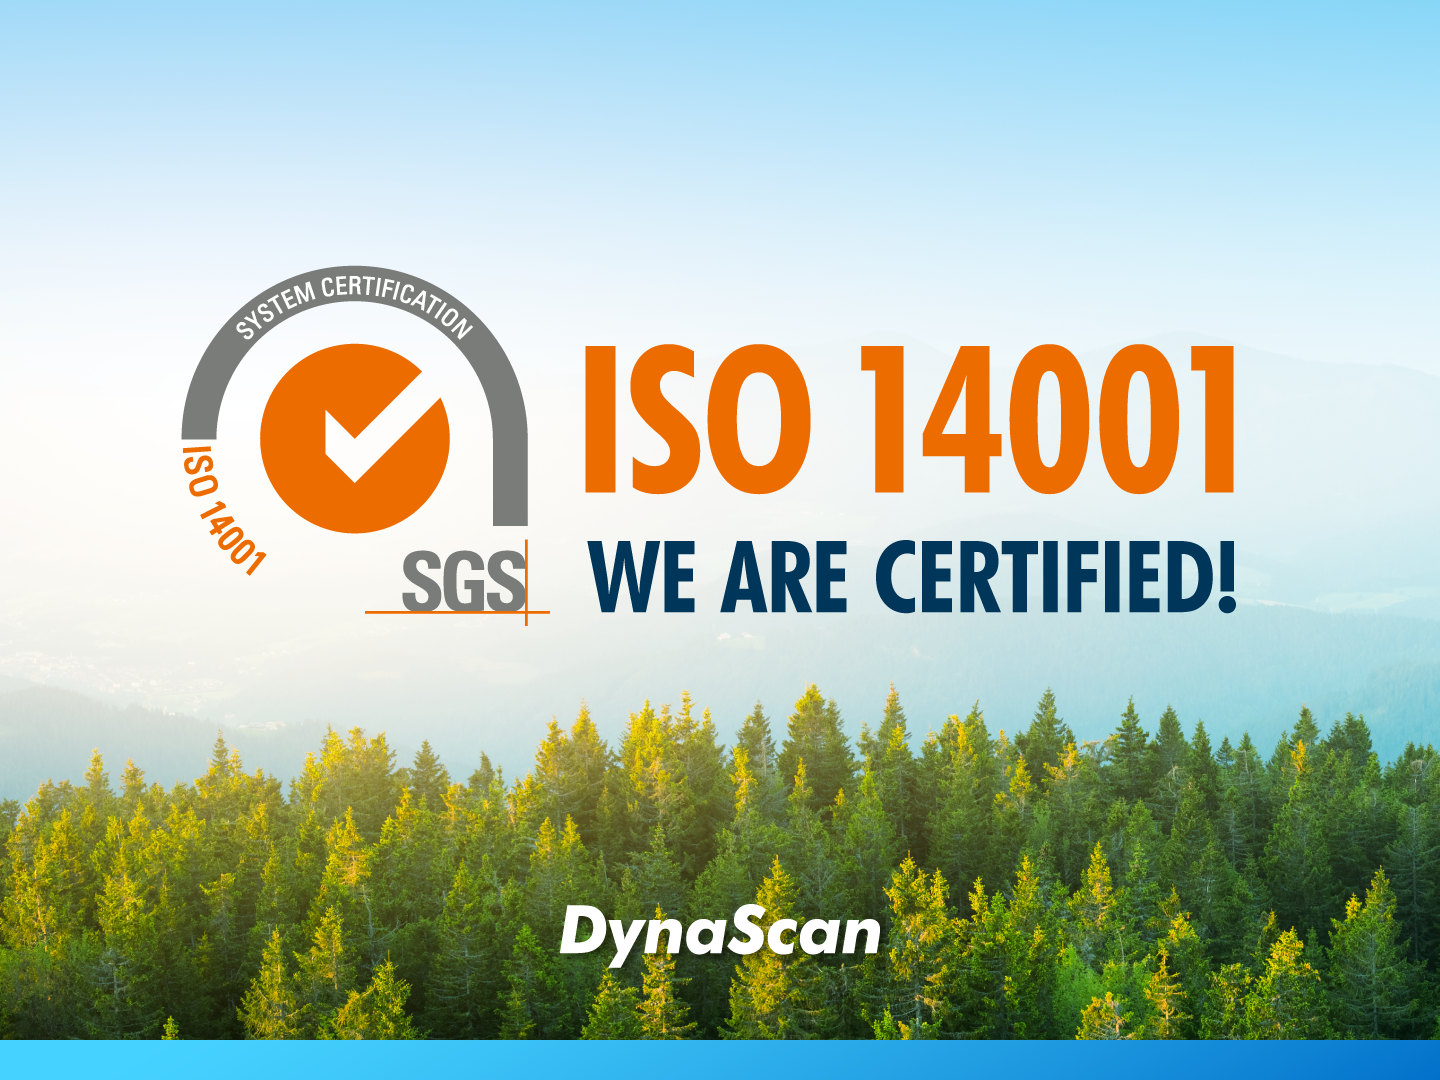 DynaScan Remains Committed to its Environmental Sustainability with ISO 14001 Certification